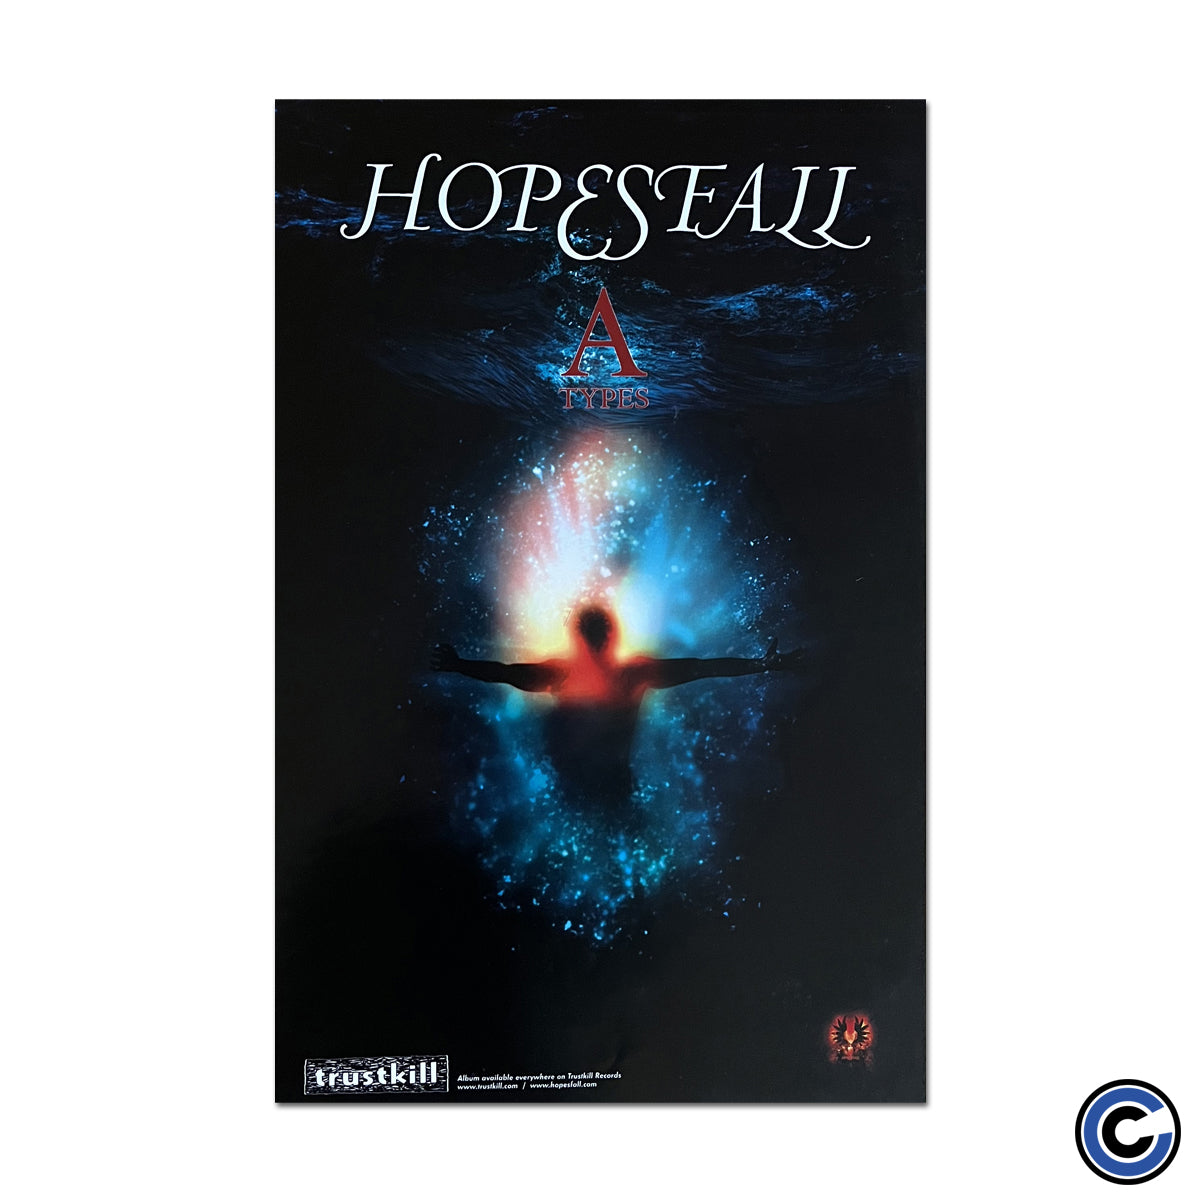 Hopesfall "A-Types" Poster